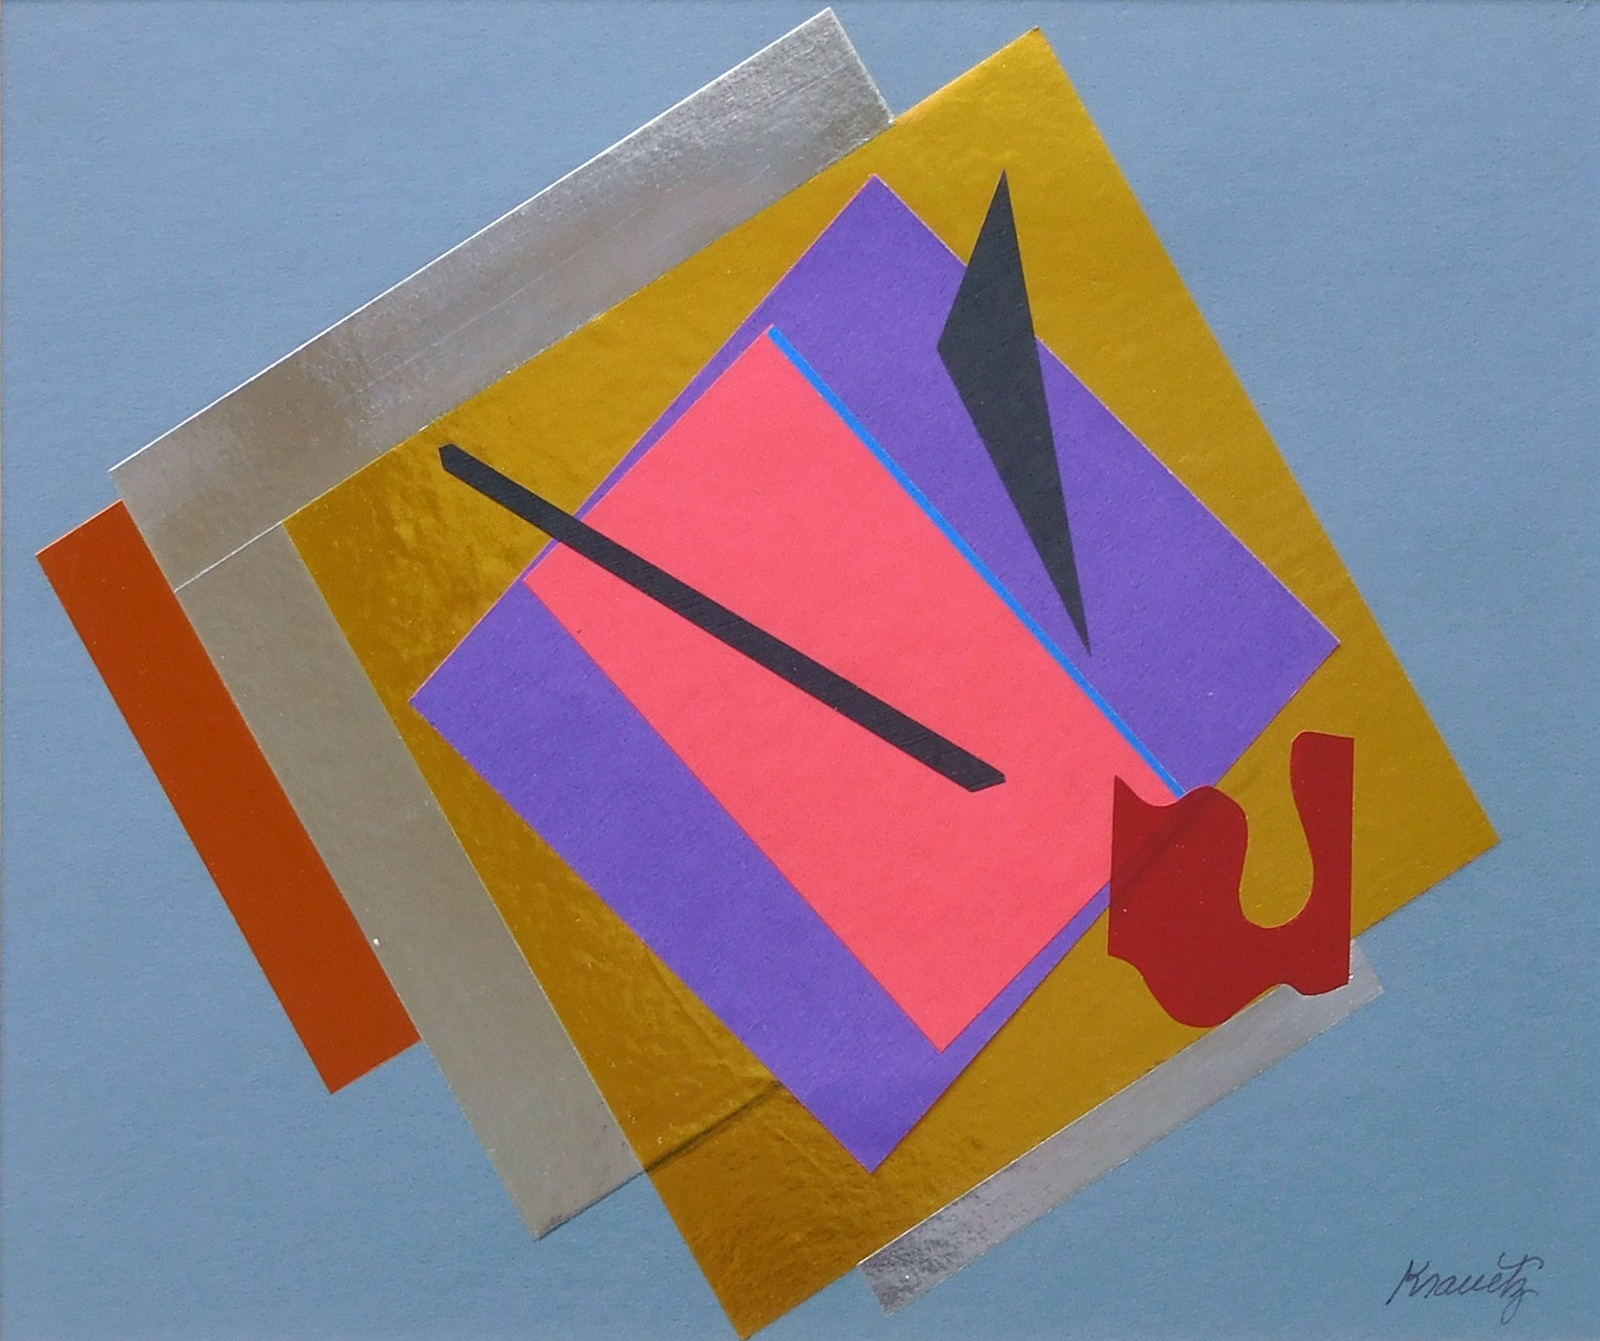 Abstract Image, 1982, Collage with Foil, 14x17 inches with mat